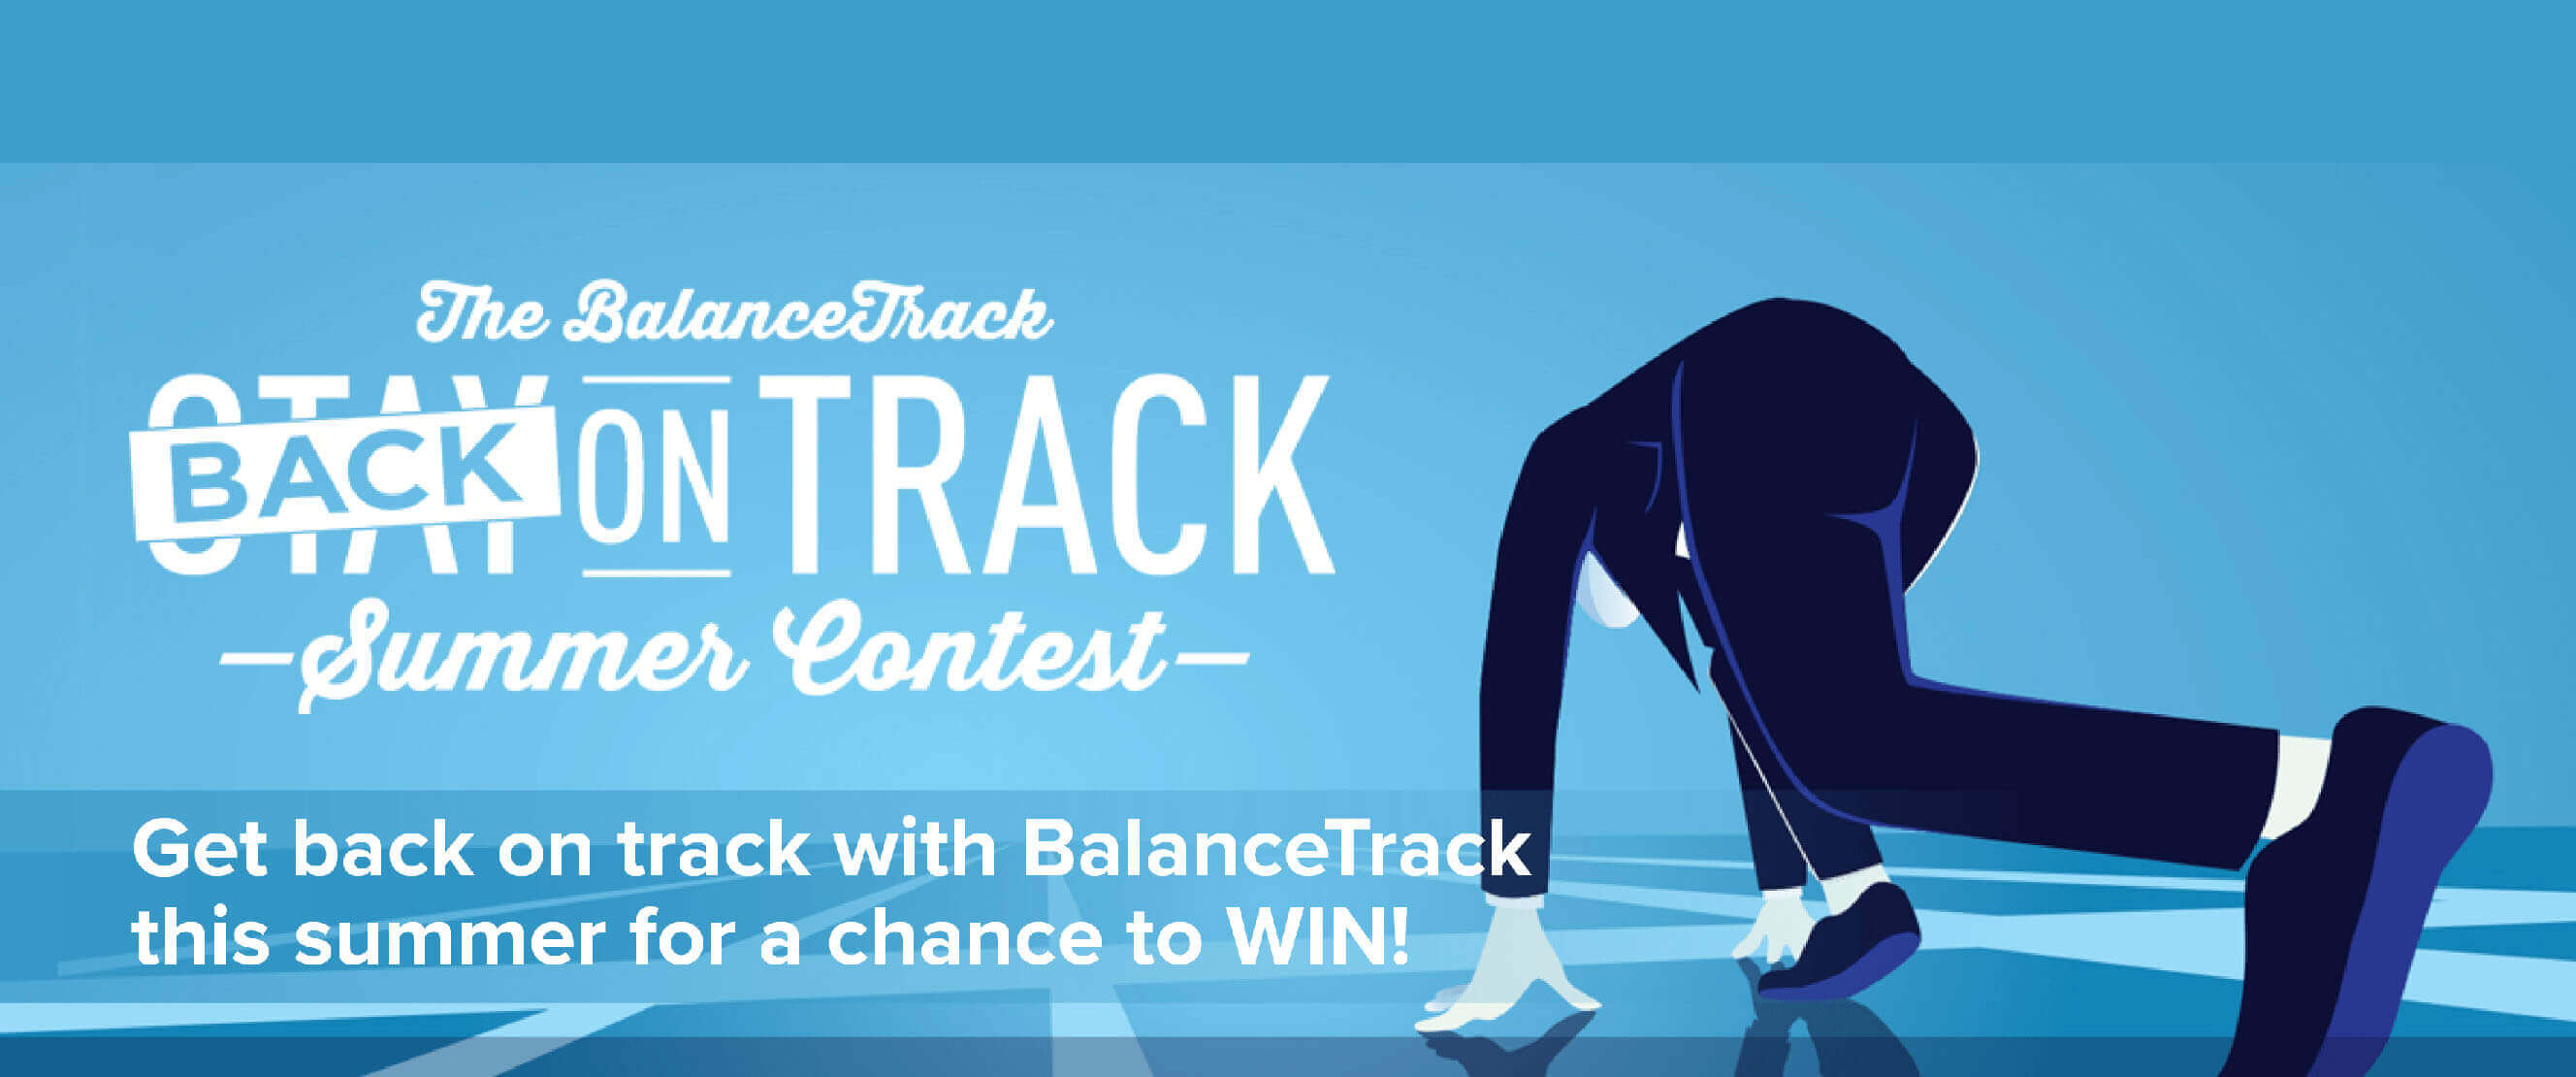 The BalanceTrack Back on track summer contest Get back on track with BalanceTrack this summer for a chance to WIN!